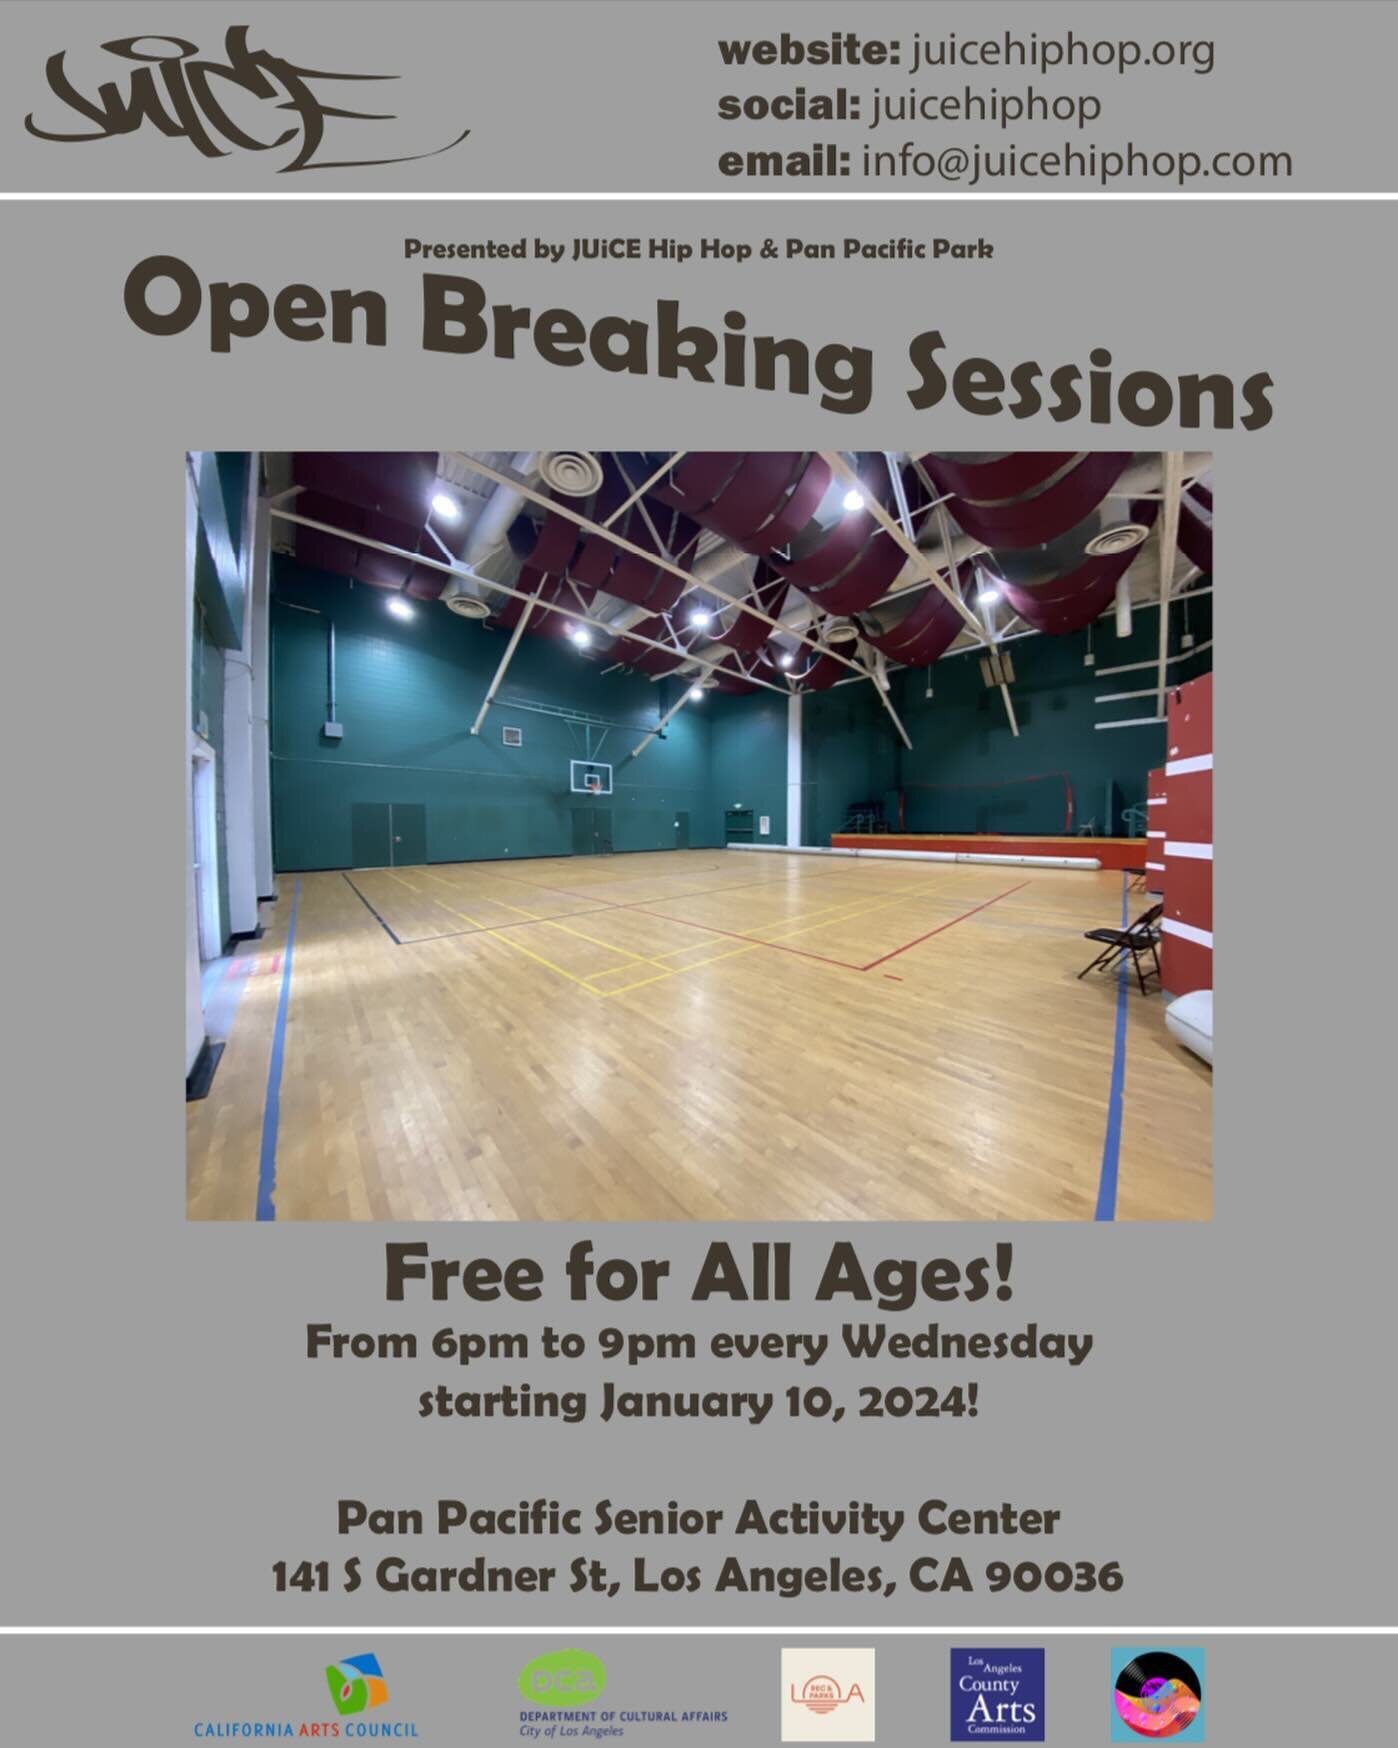 We are thrilled to collaborate with Pan Pacific Park to roll out a new breaking program and free open dance sessions at the Pan Pacific Senior Activity Center starting tomorrow and every Wednesday. Our kids and youth breaking classes will begin next 